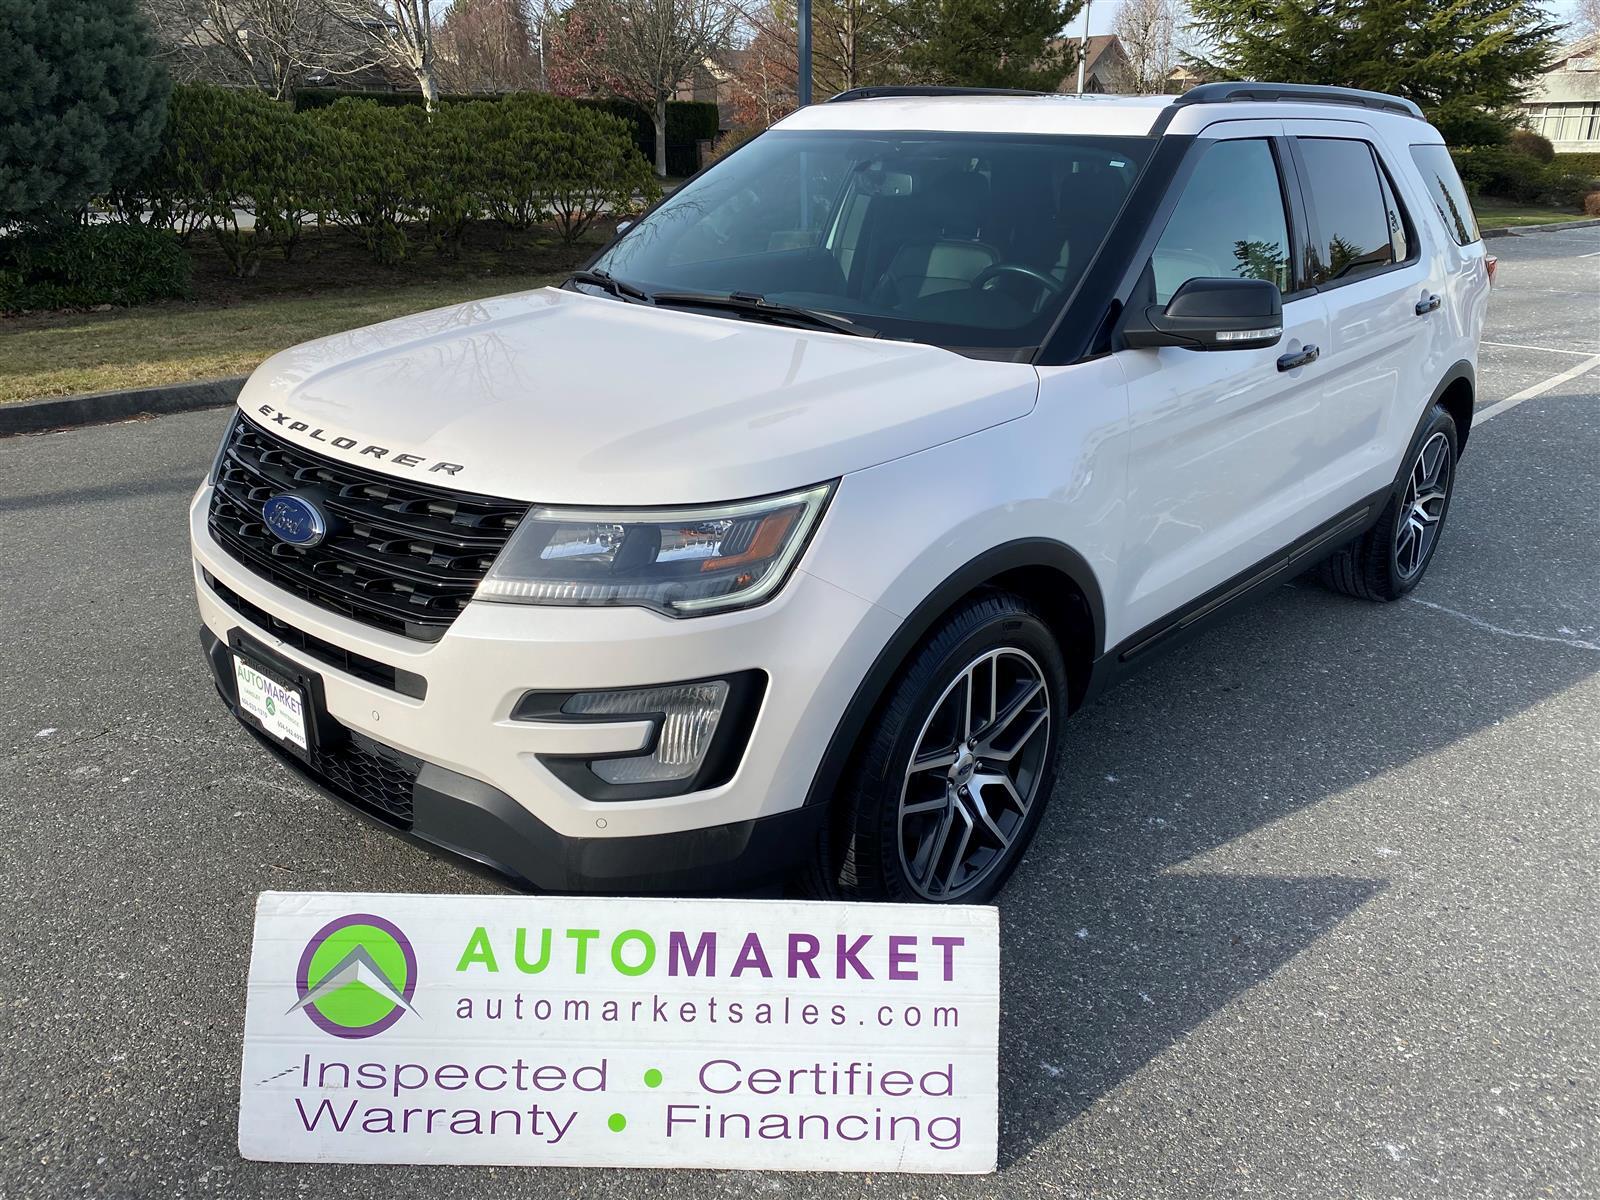 2017 Ford Explorer Sport 4WD LEATHER, PANO ROOF, FINANCING, WARRANTY,